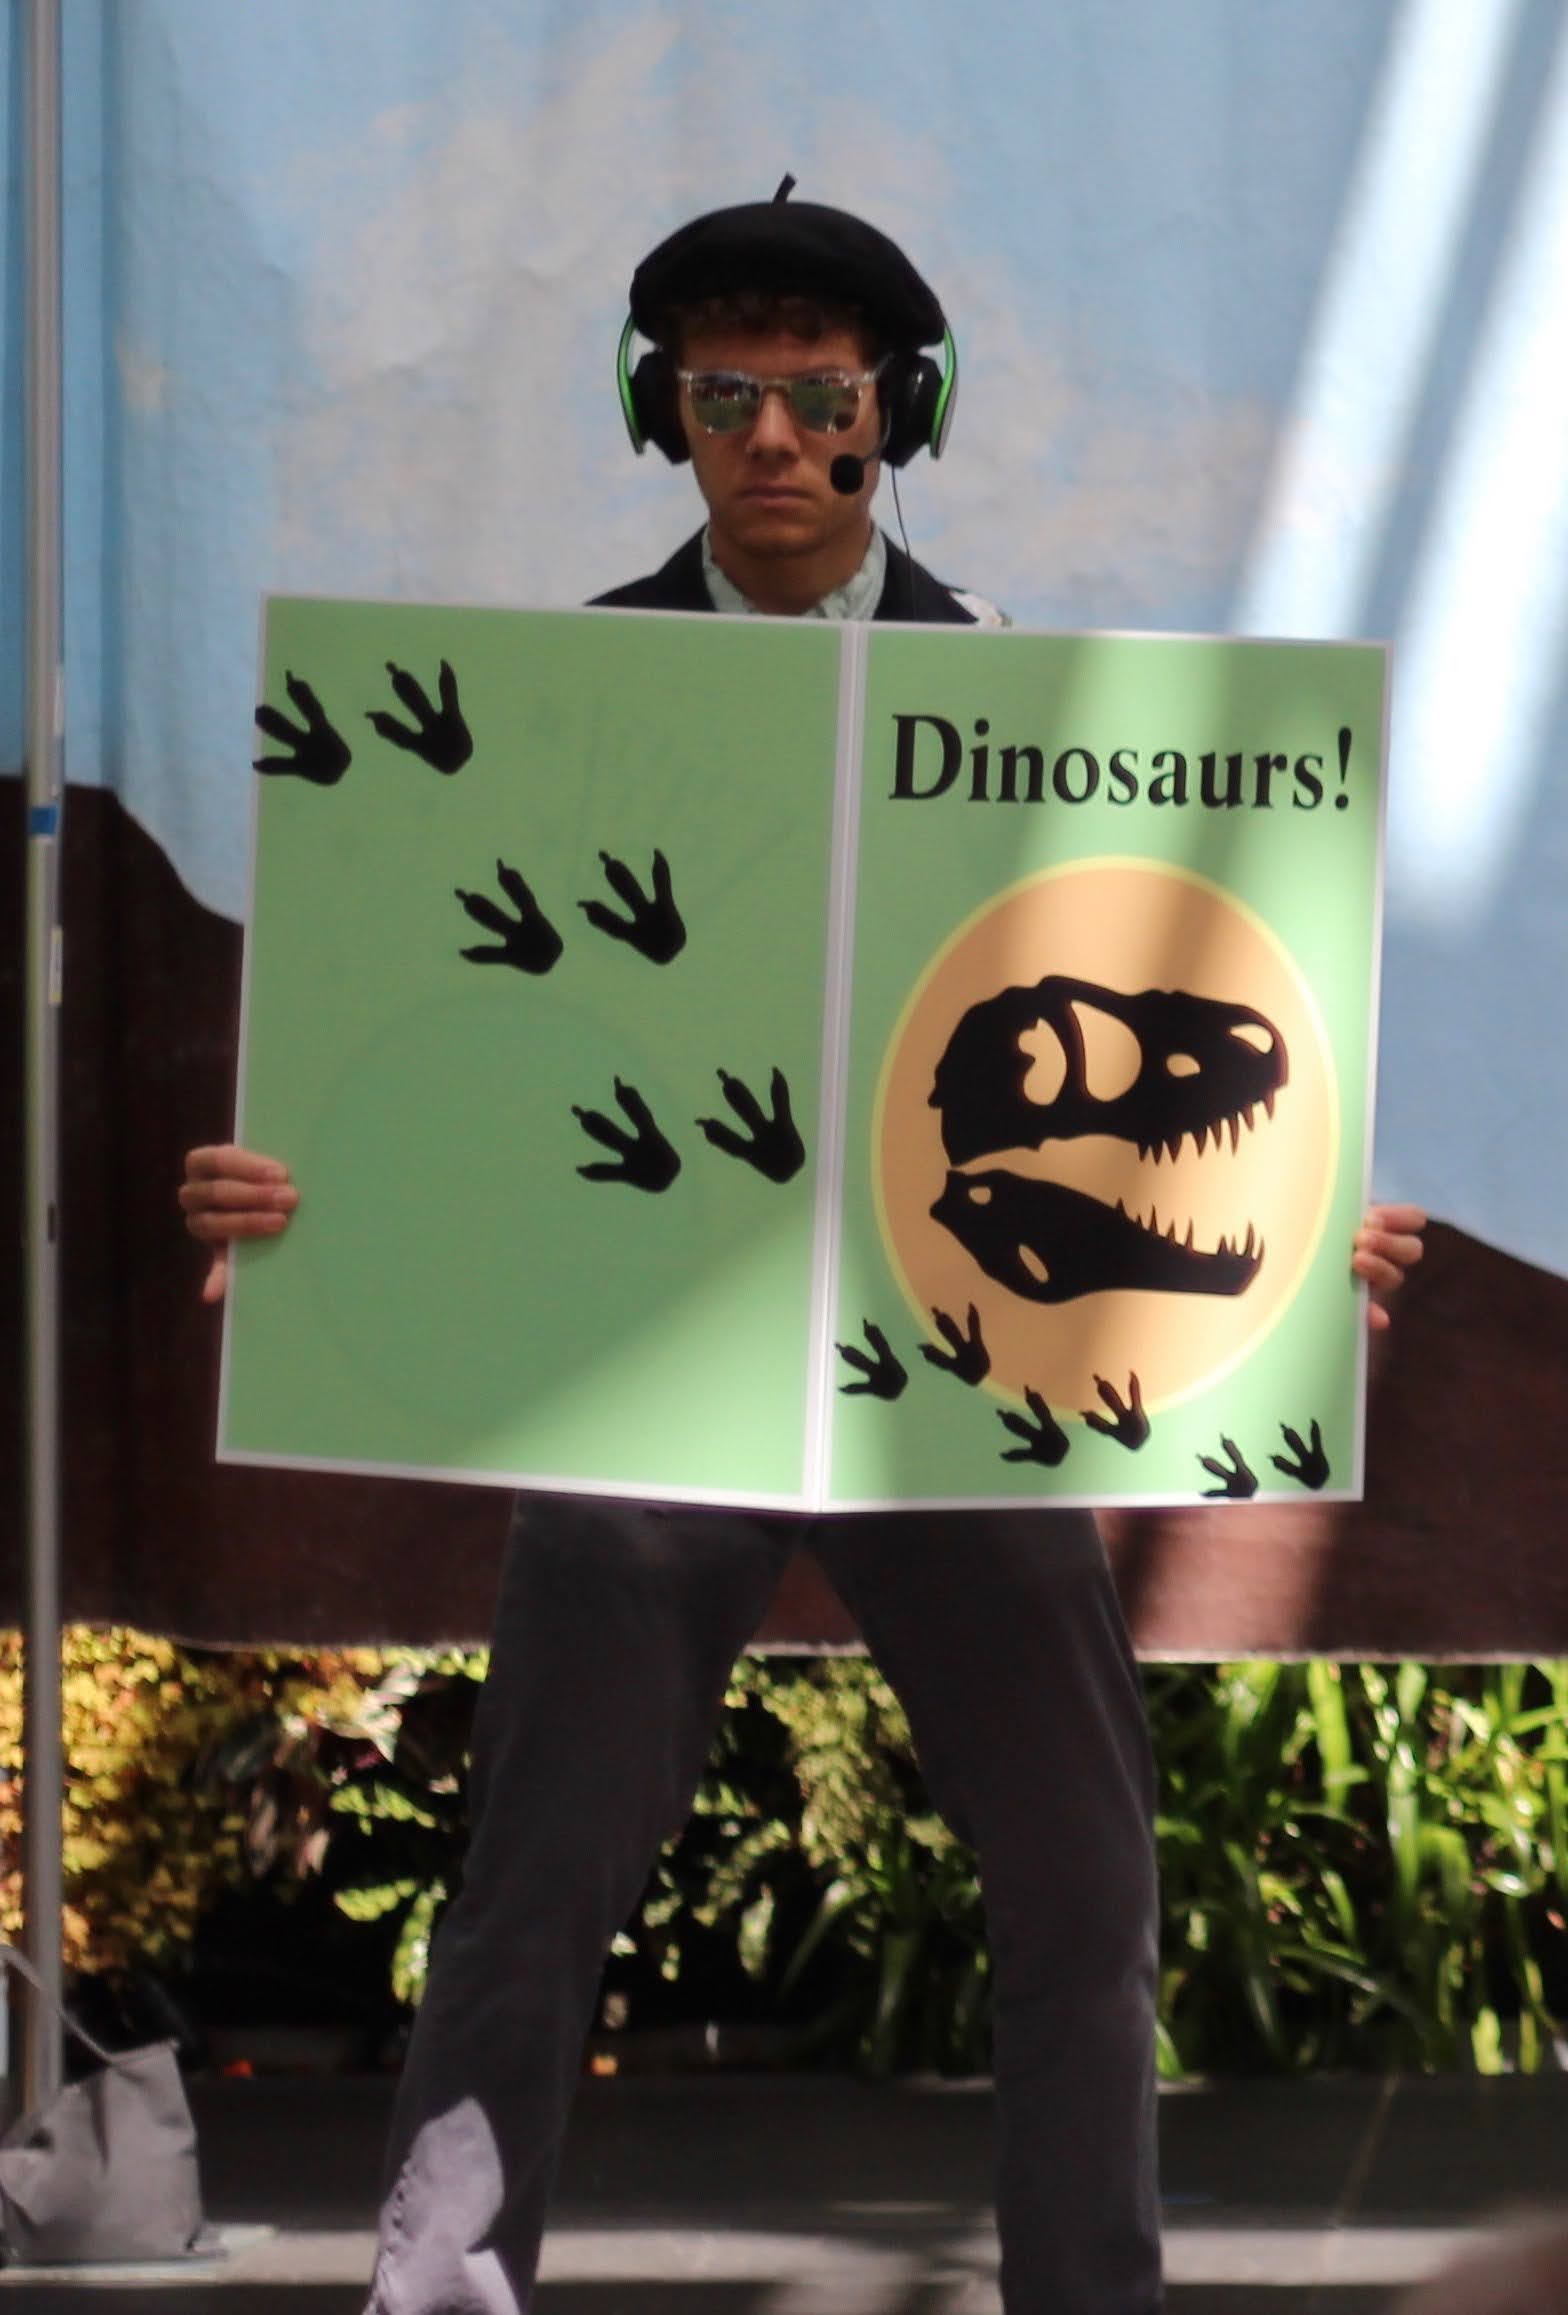 Benjamin Faulkner is standing on a stage with a large green book in his hands that has a picture of a dinosaur on it.